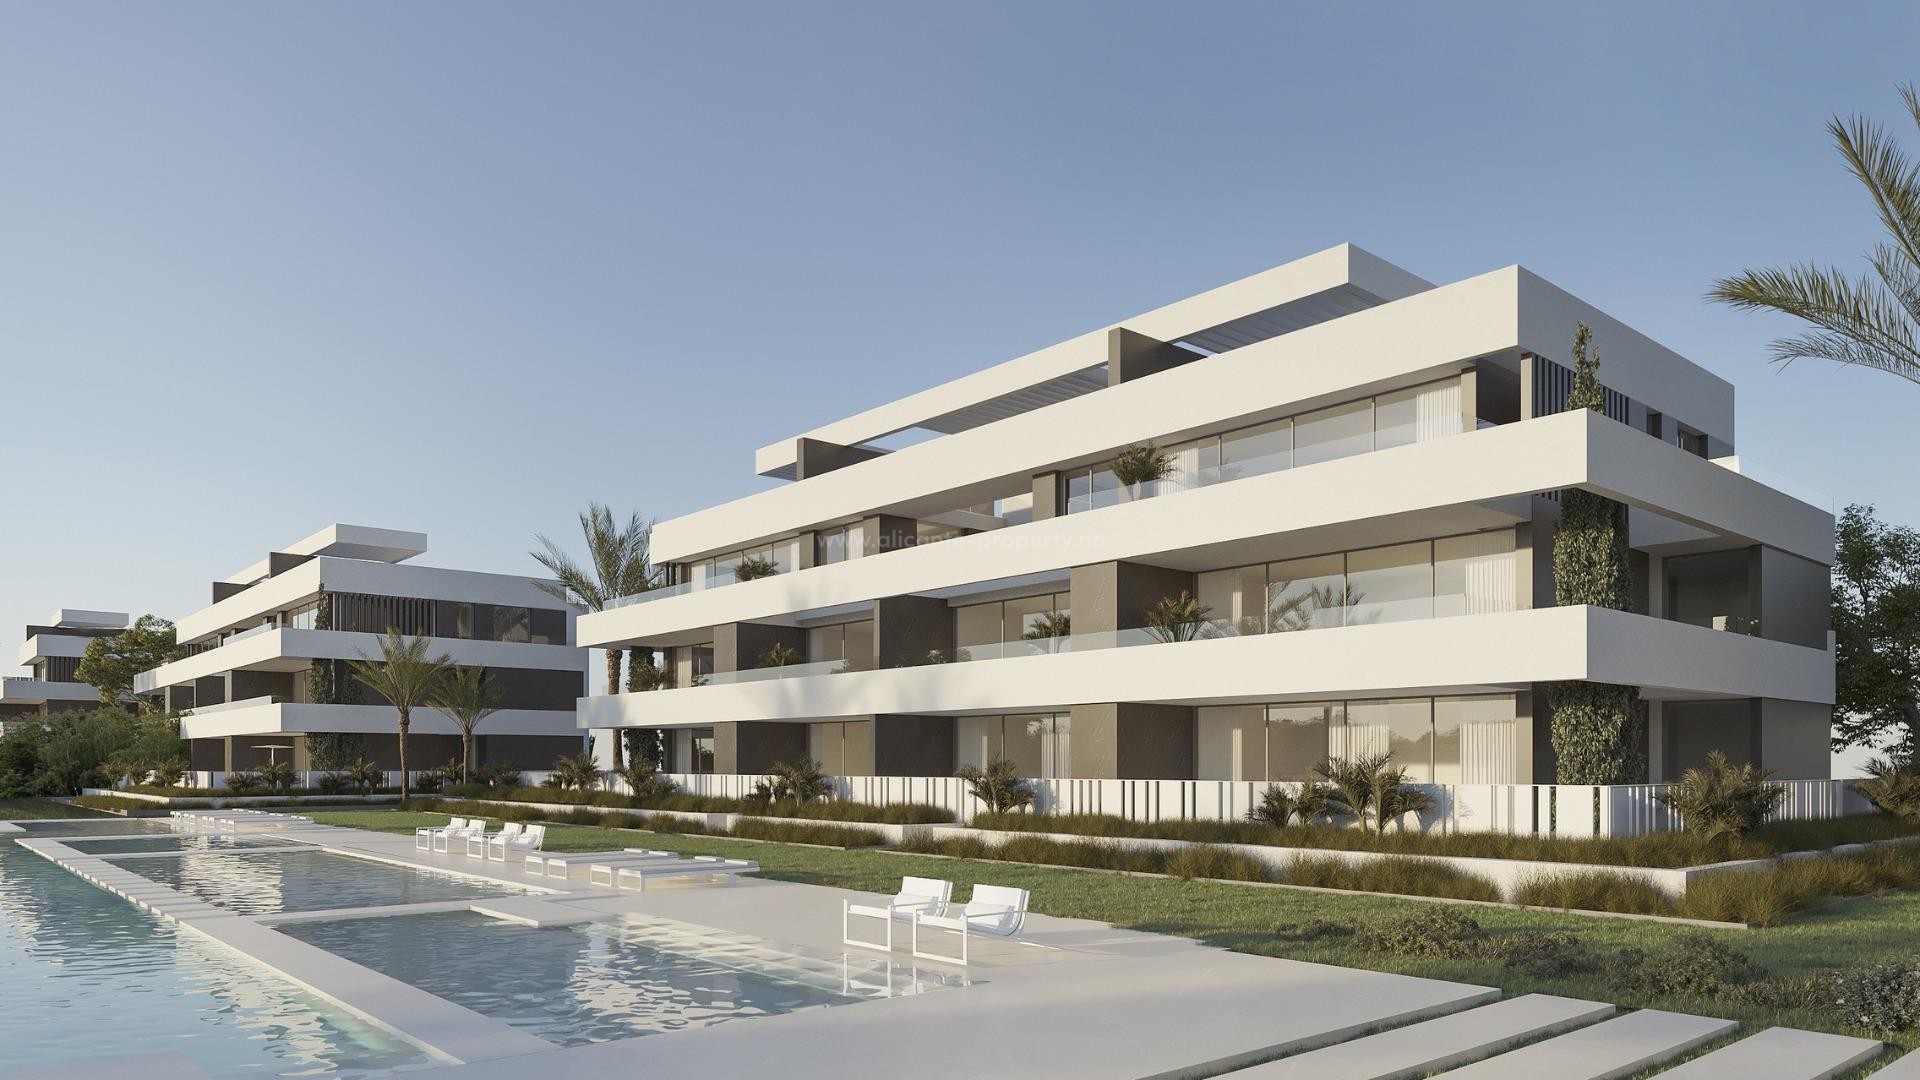 Luxury apartments in La Nucia, 2/3 bedrooms, 2 bathrooms, terraces, shared outdoor pool, spa with heated indoor pool, sauna and hot tub